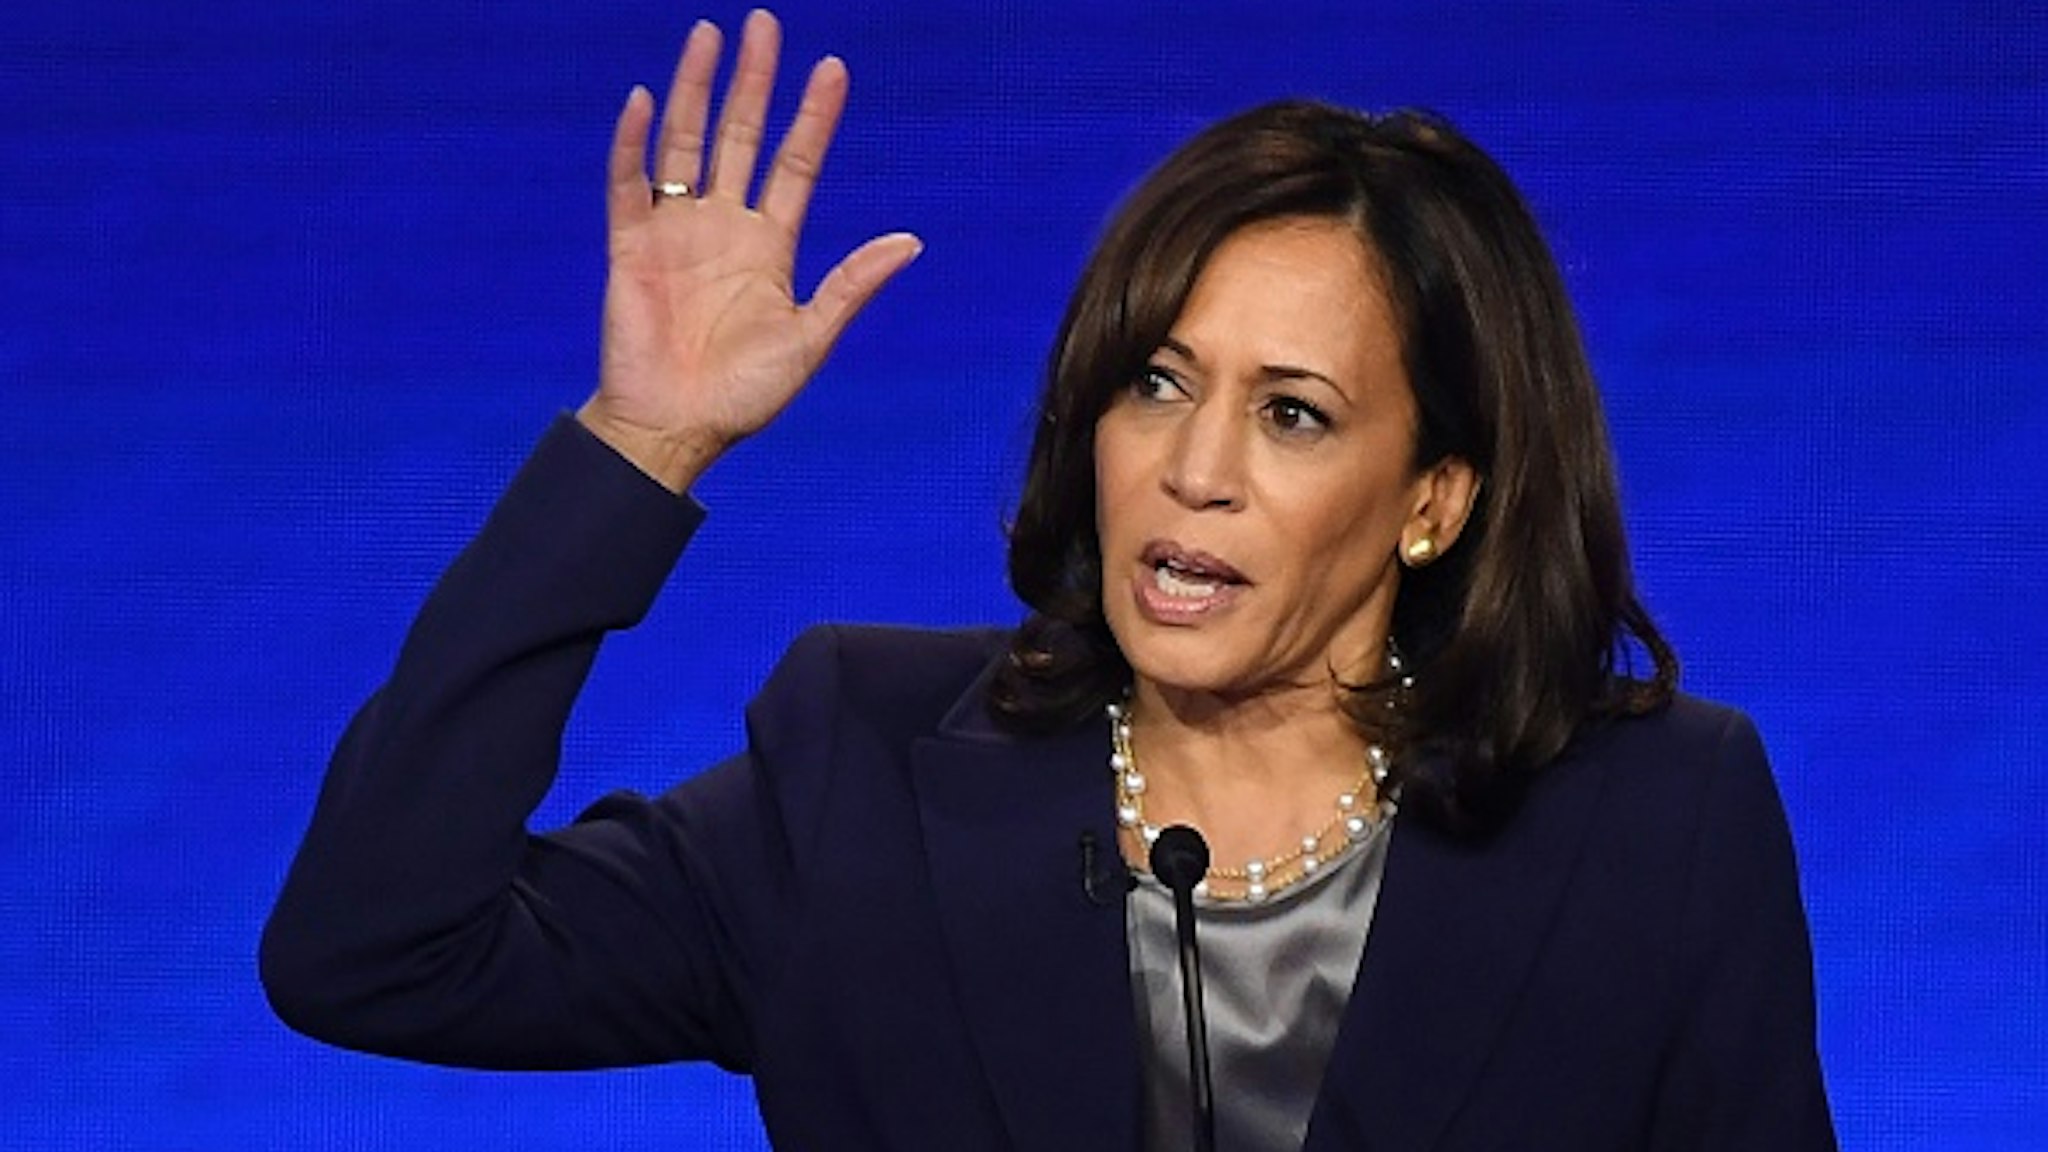 Democratic presidential hopeful California Senator Kamala Harris speaks during the third Democratic primary debate of the 2020 presidential campaign season hosted by ABC News in partnership with Univision at Texas Southern University in Houston, Texas on September 12, 2019.